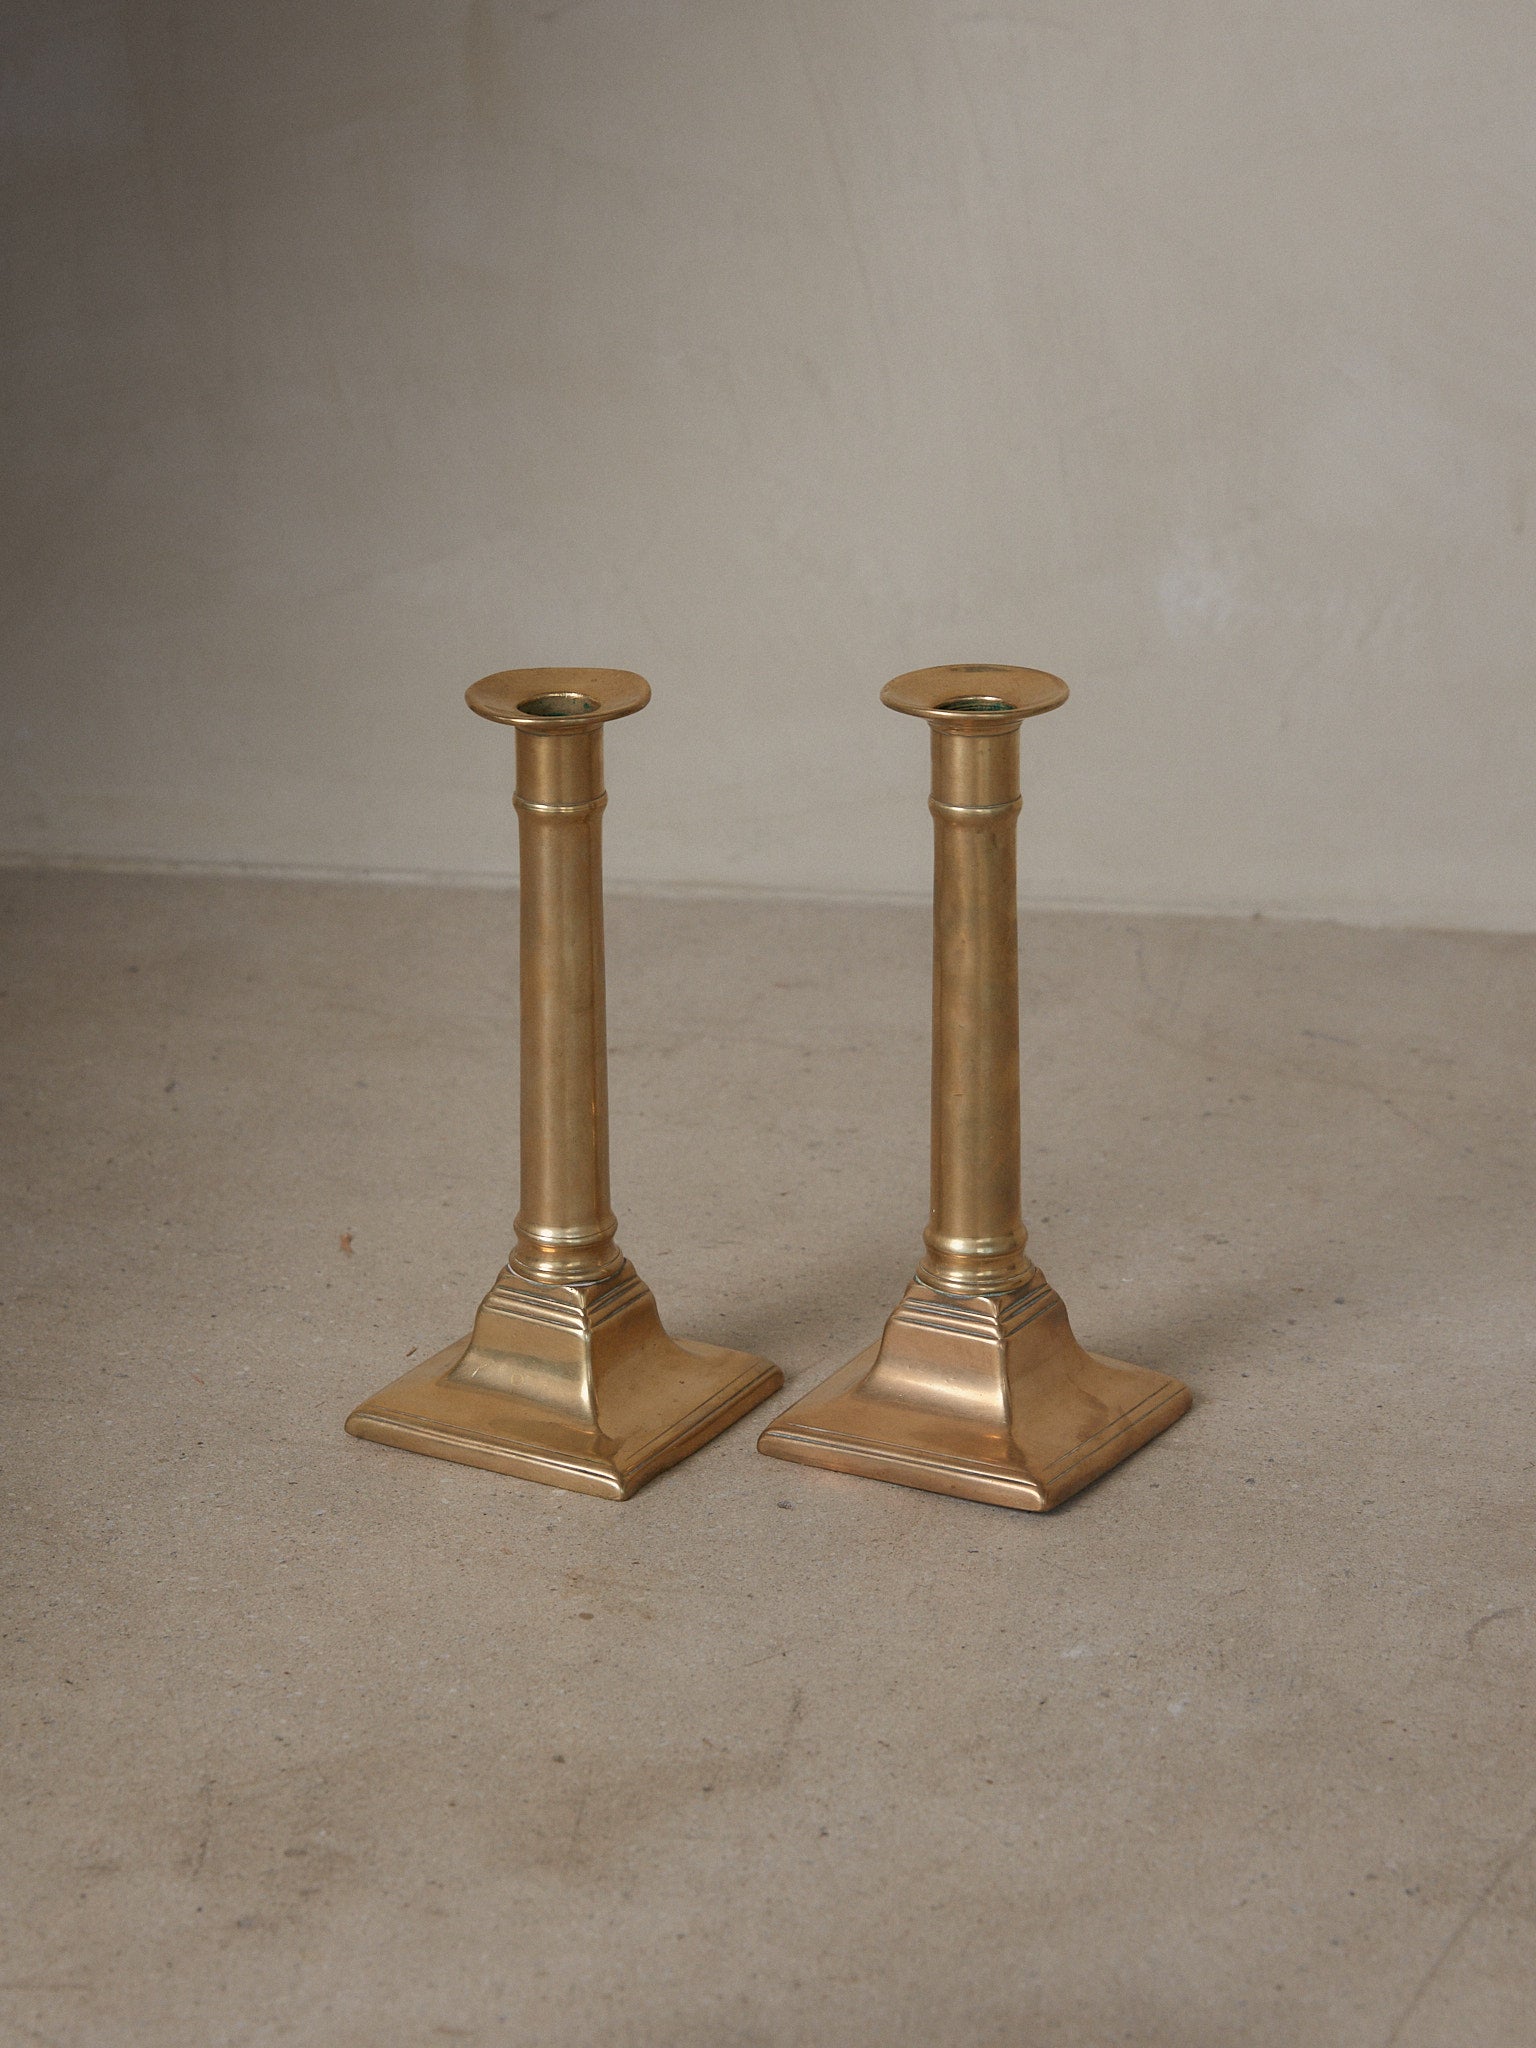 Vintage Push Up Candle Holders. Rare vintage find. Pair of stately 19th century English column candle holders with push up mechanism in brass.